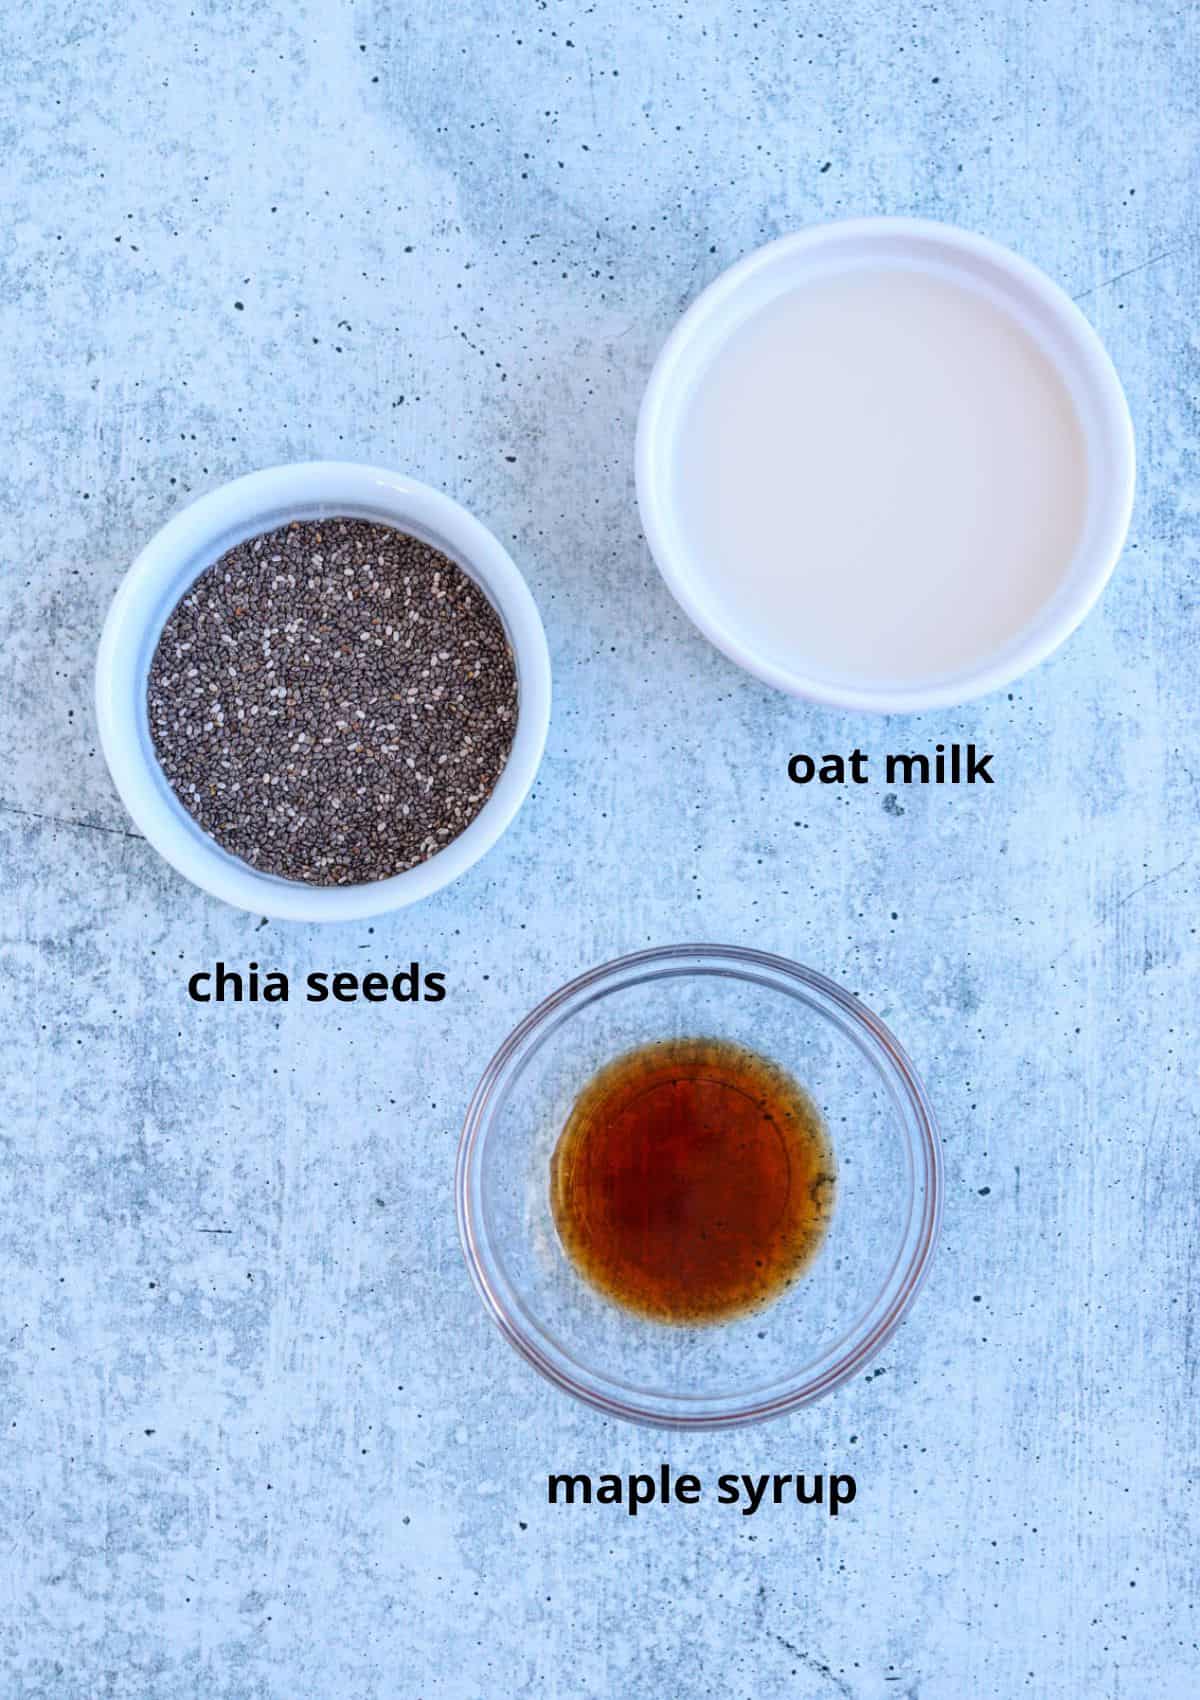 chia seeds, oat milk and maple syrup in small round containers on gray surface.